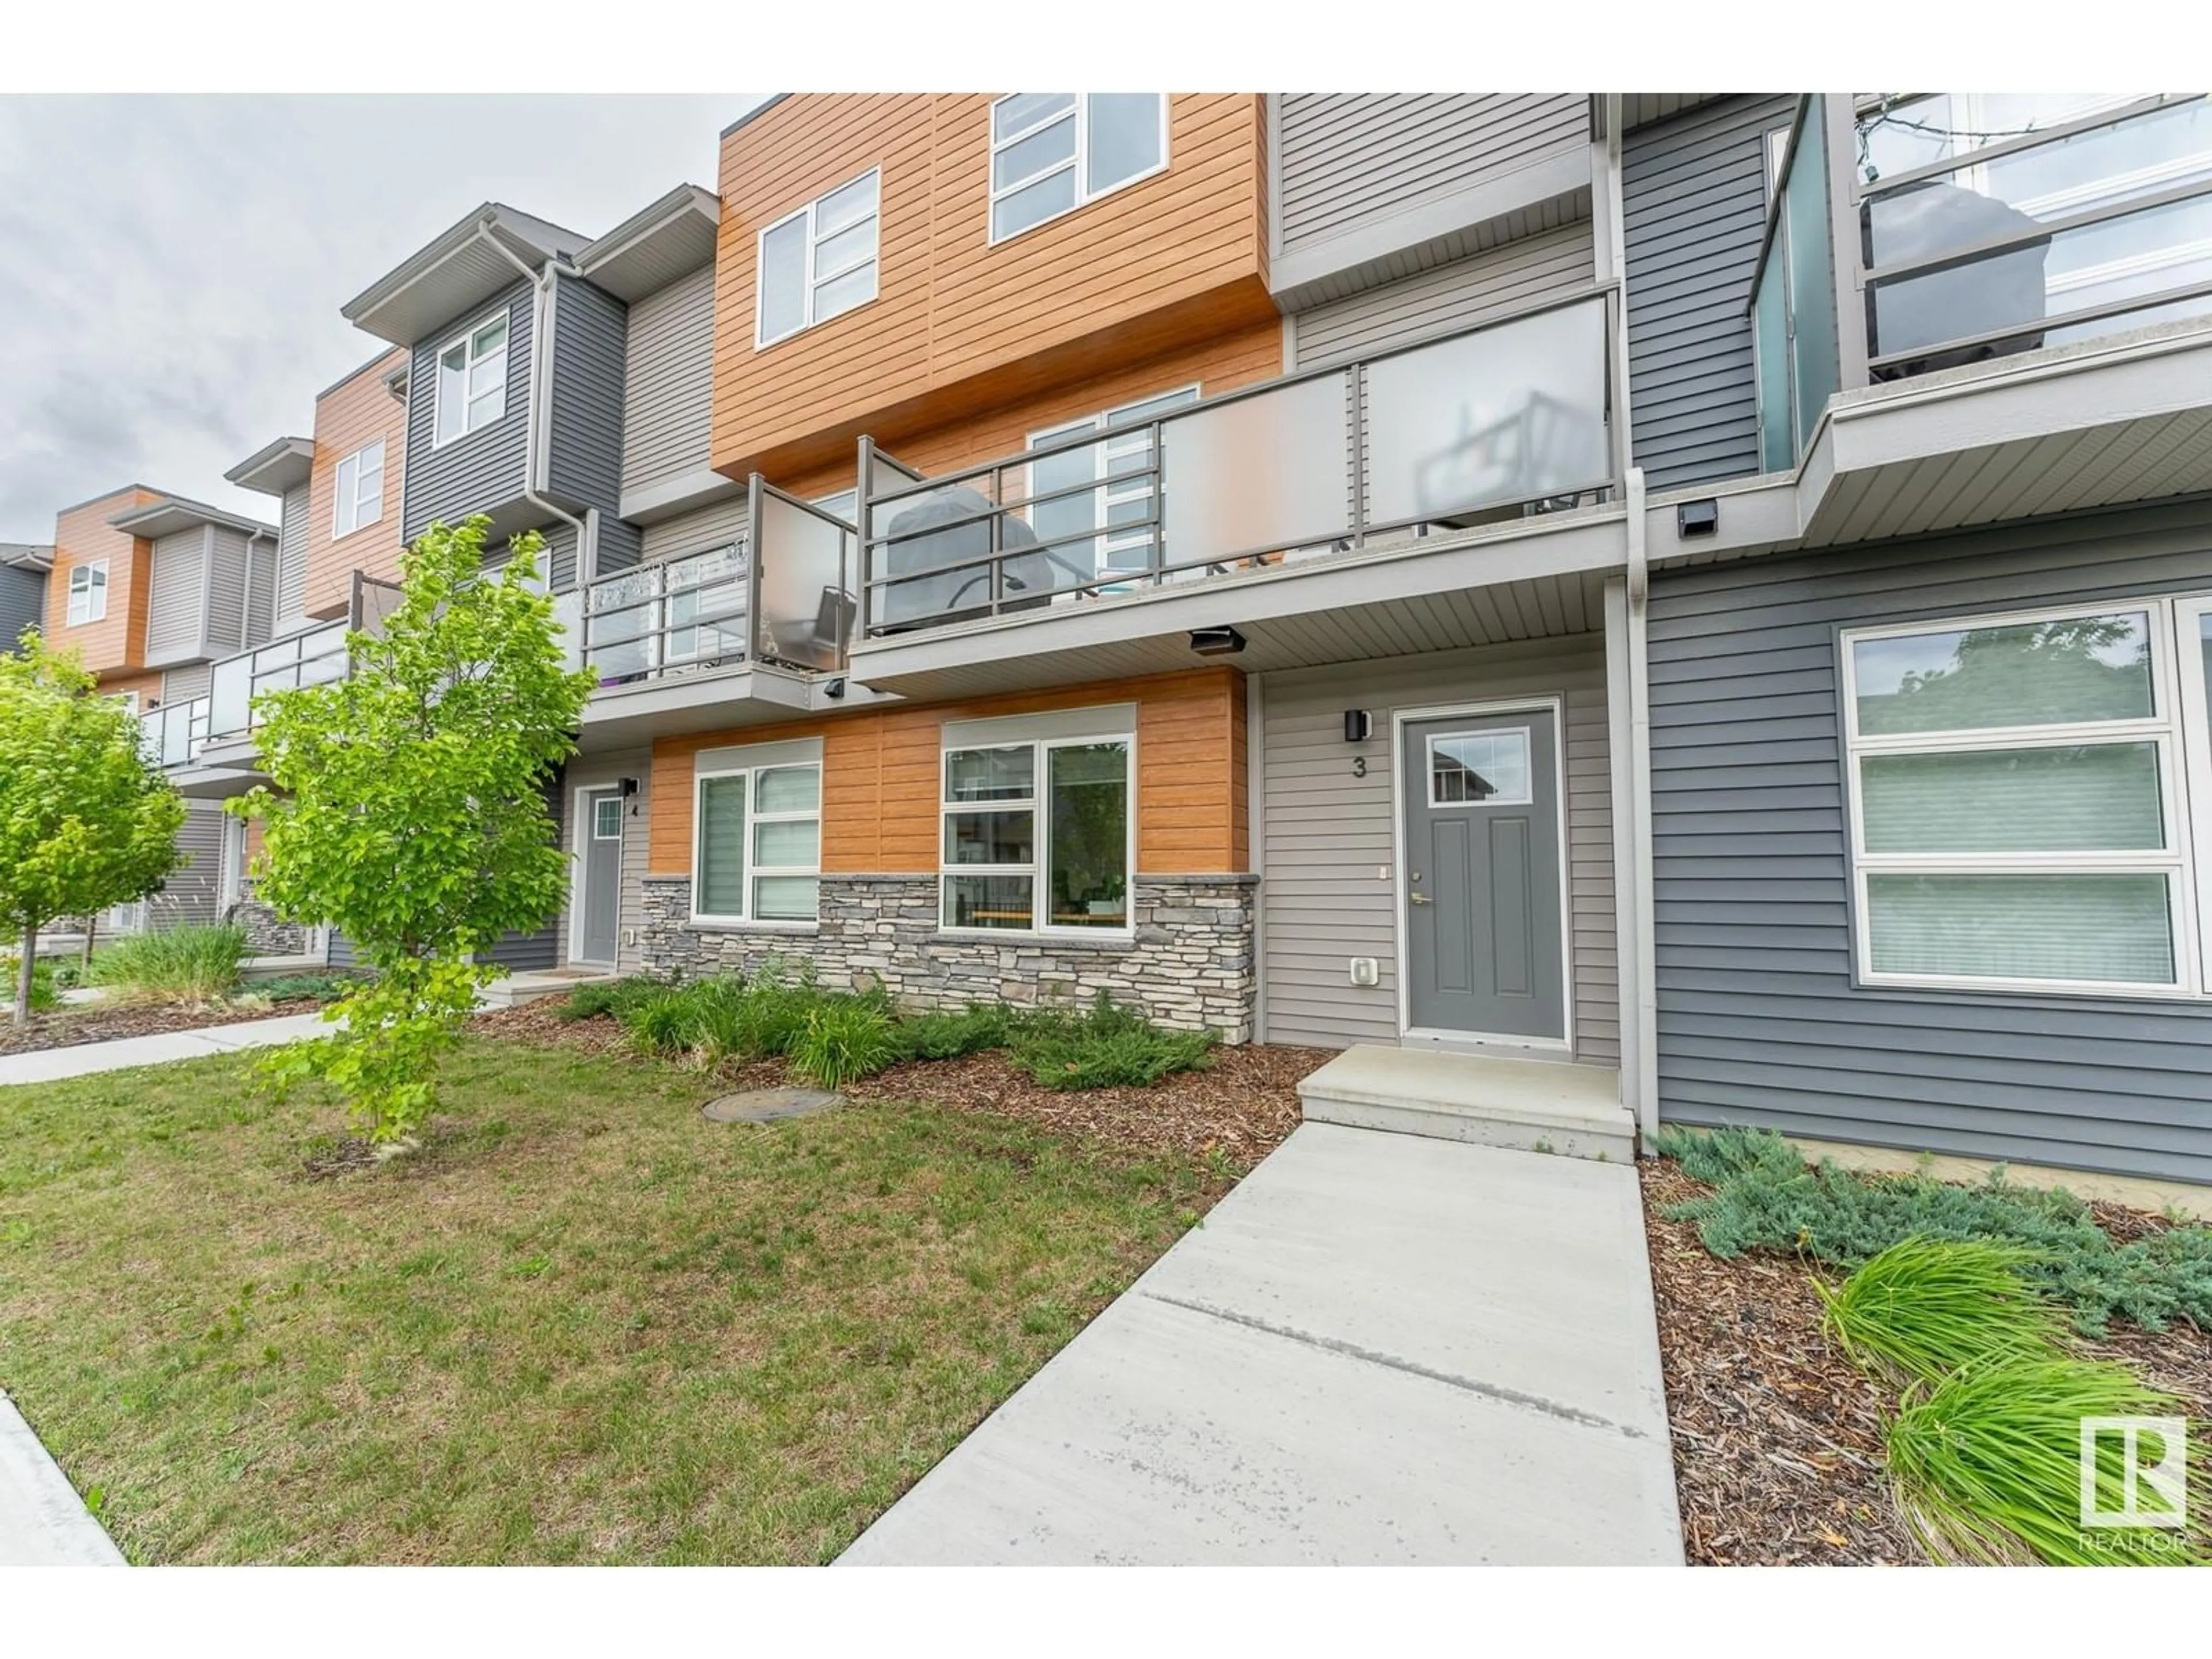 A pic from exterior of the house or condo for #3 17635 58 ST NW, Edmonton Alberta T5Y4C2